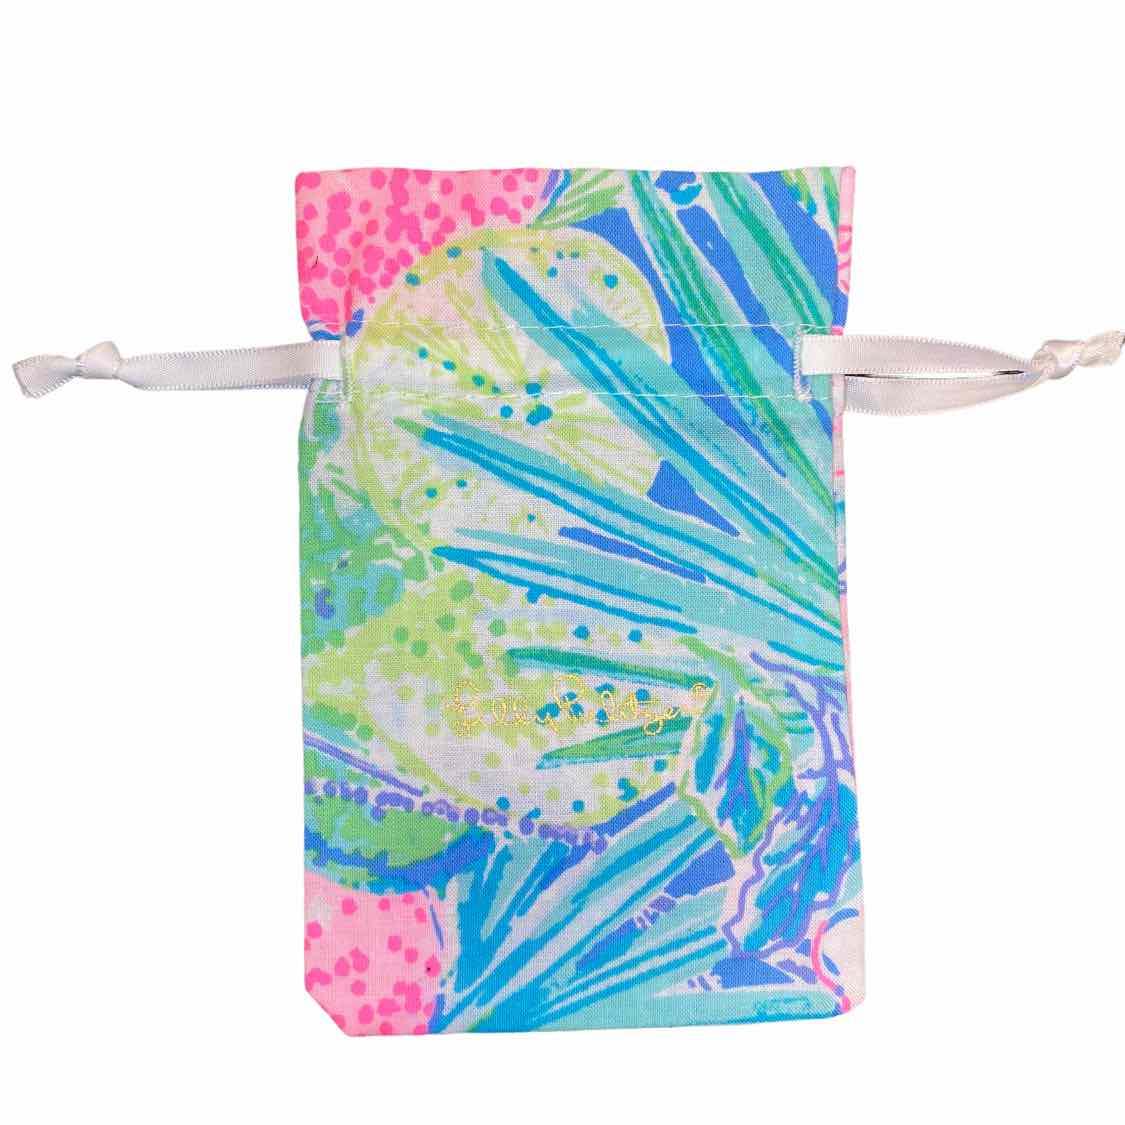 Lilly Pulitzer Earrings